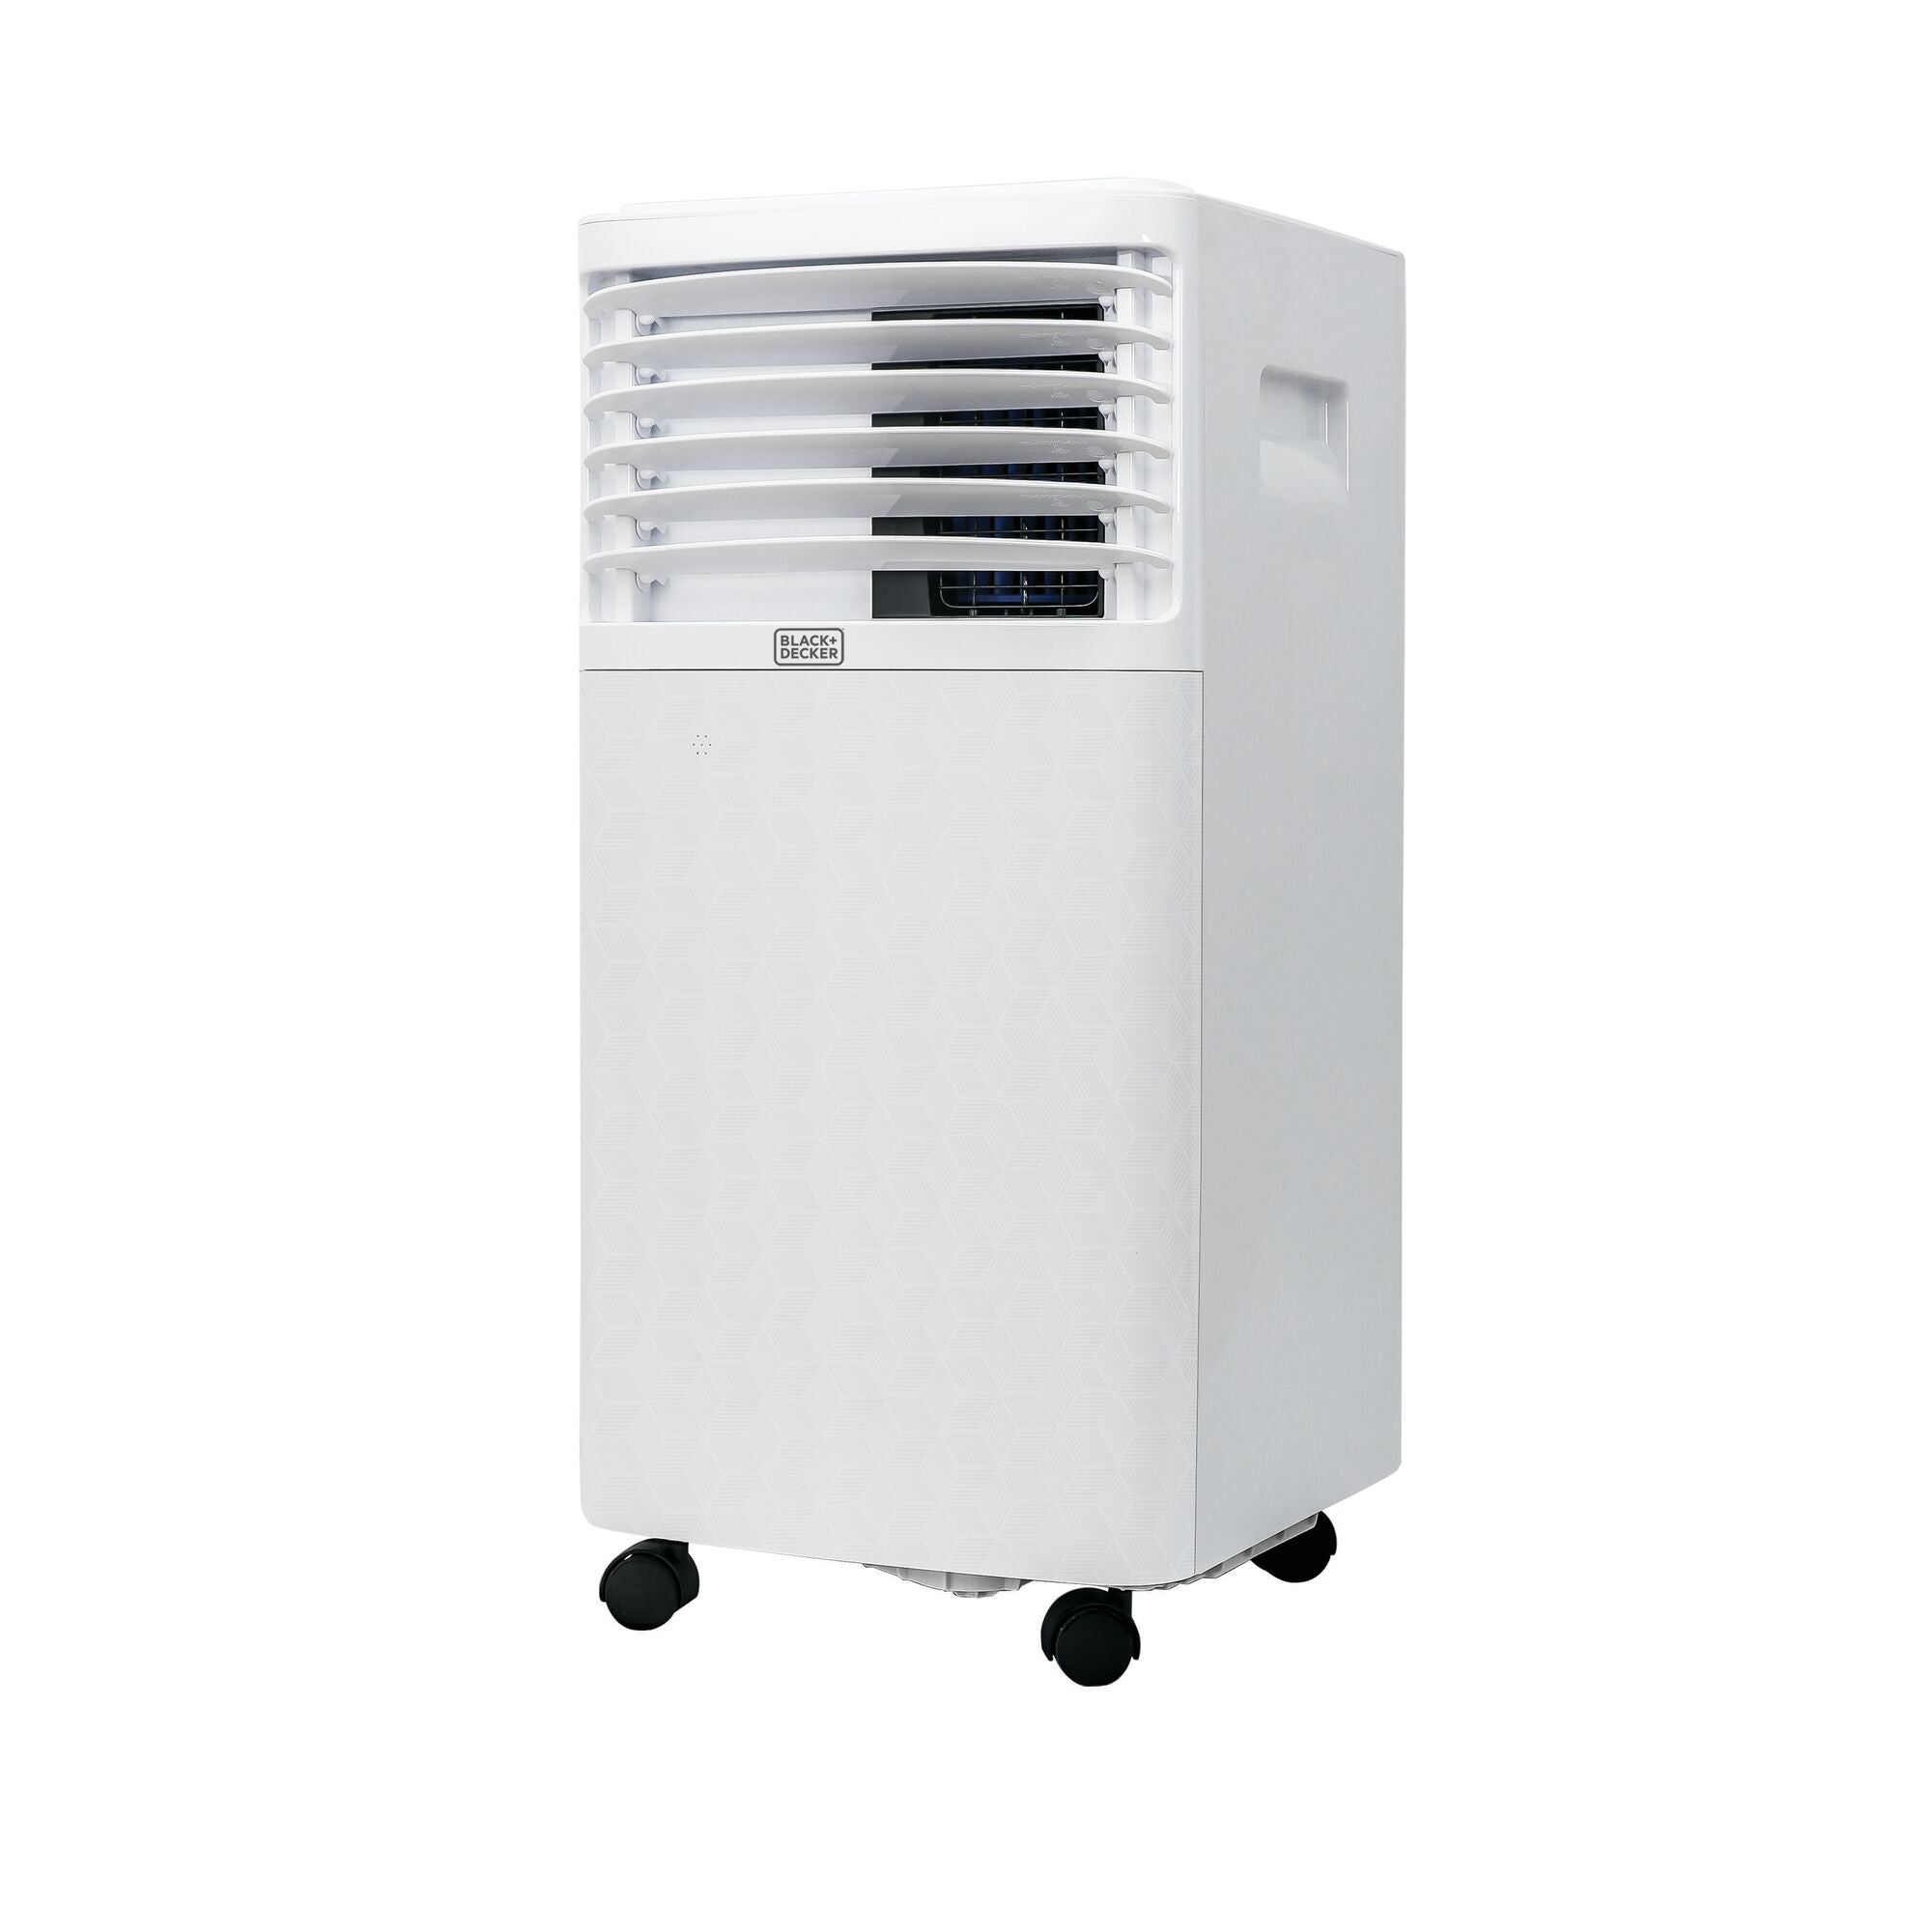 Black-deker Bpp05wtb Portable Air Conditioner With Remote Control White for  sale online